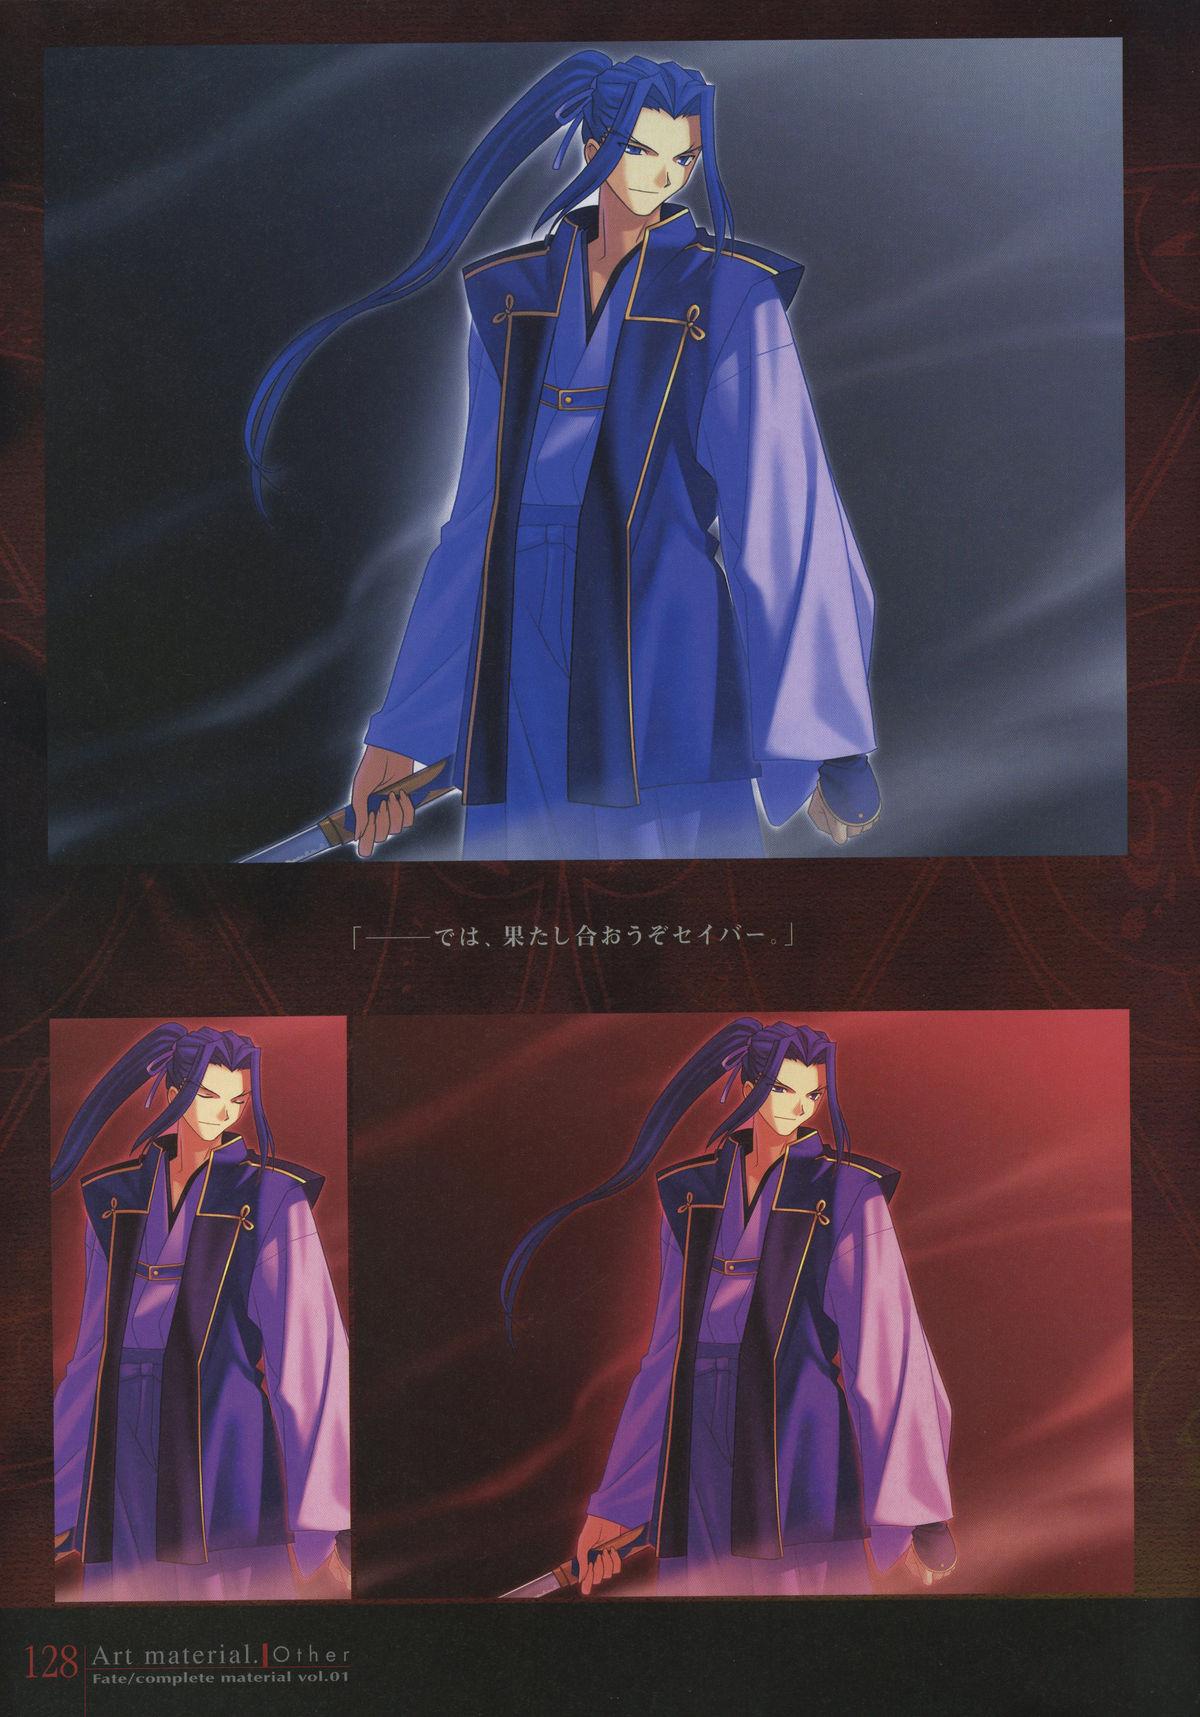 Fate/complete material I - Art material. 132